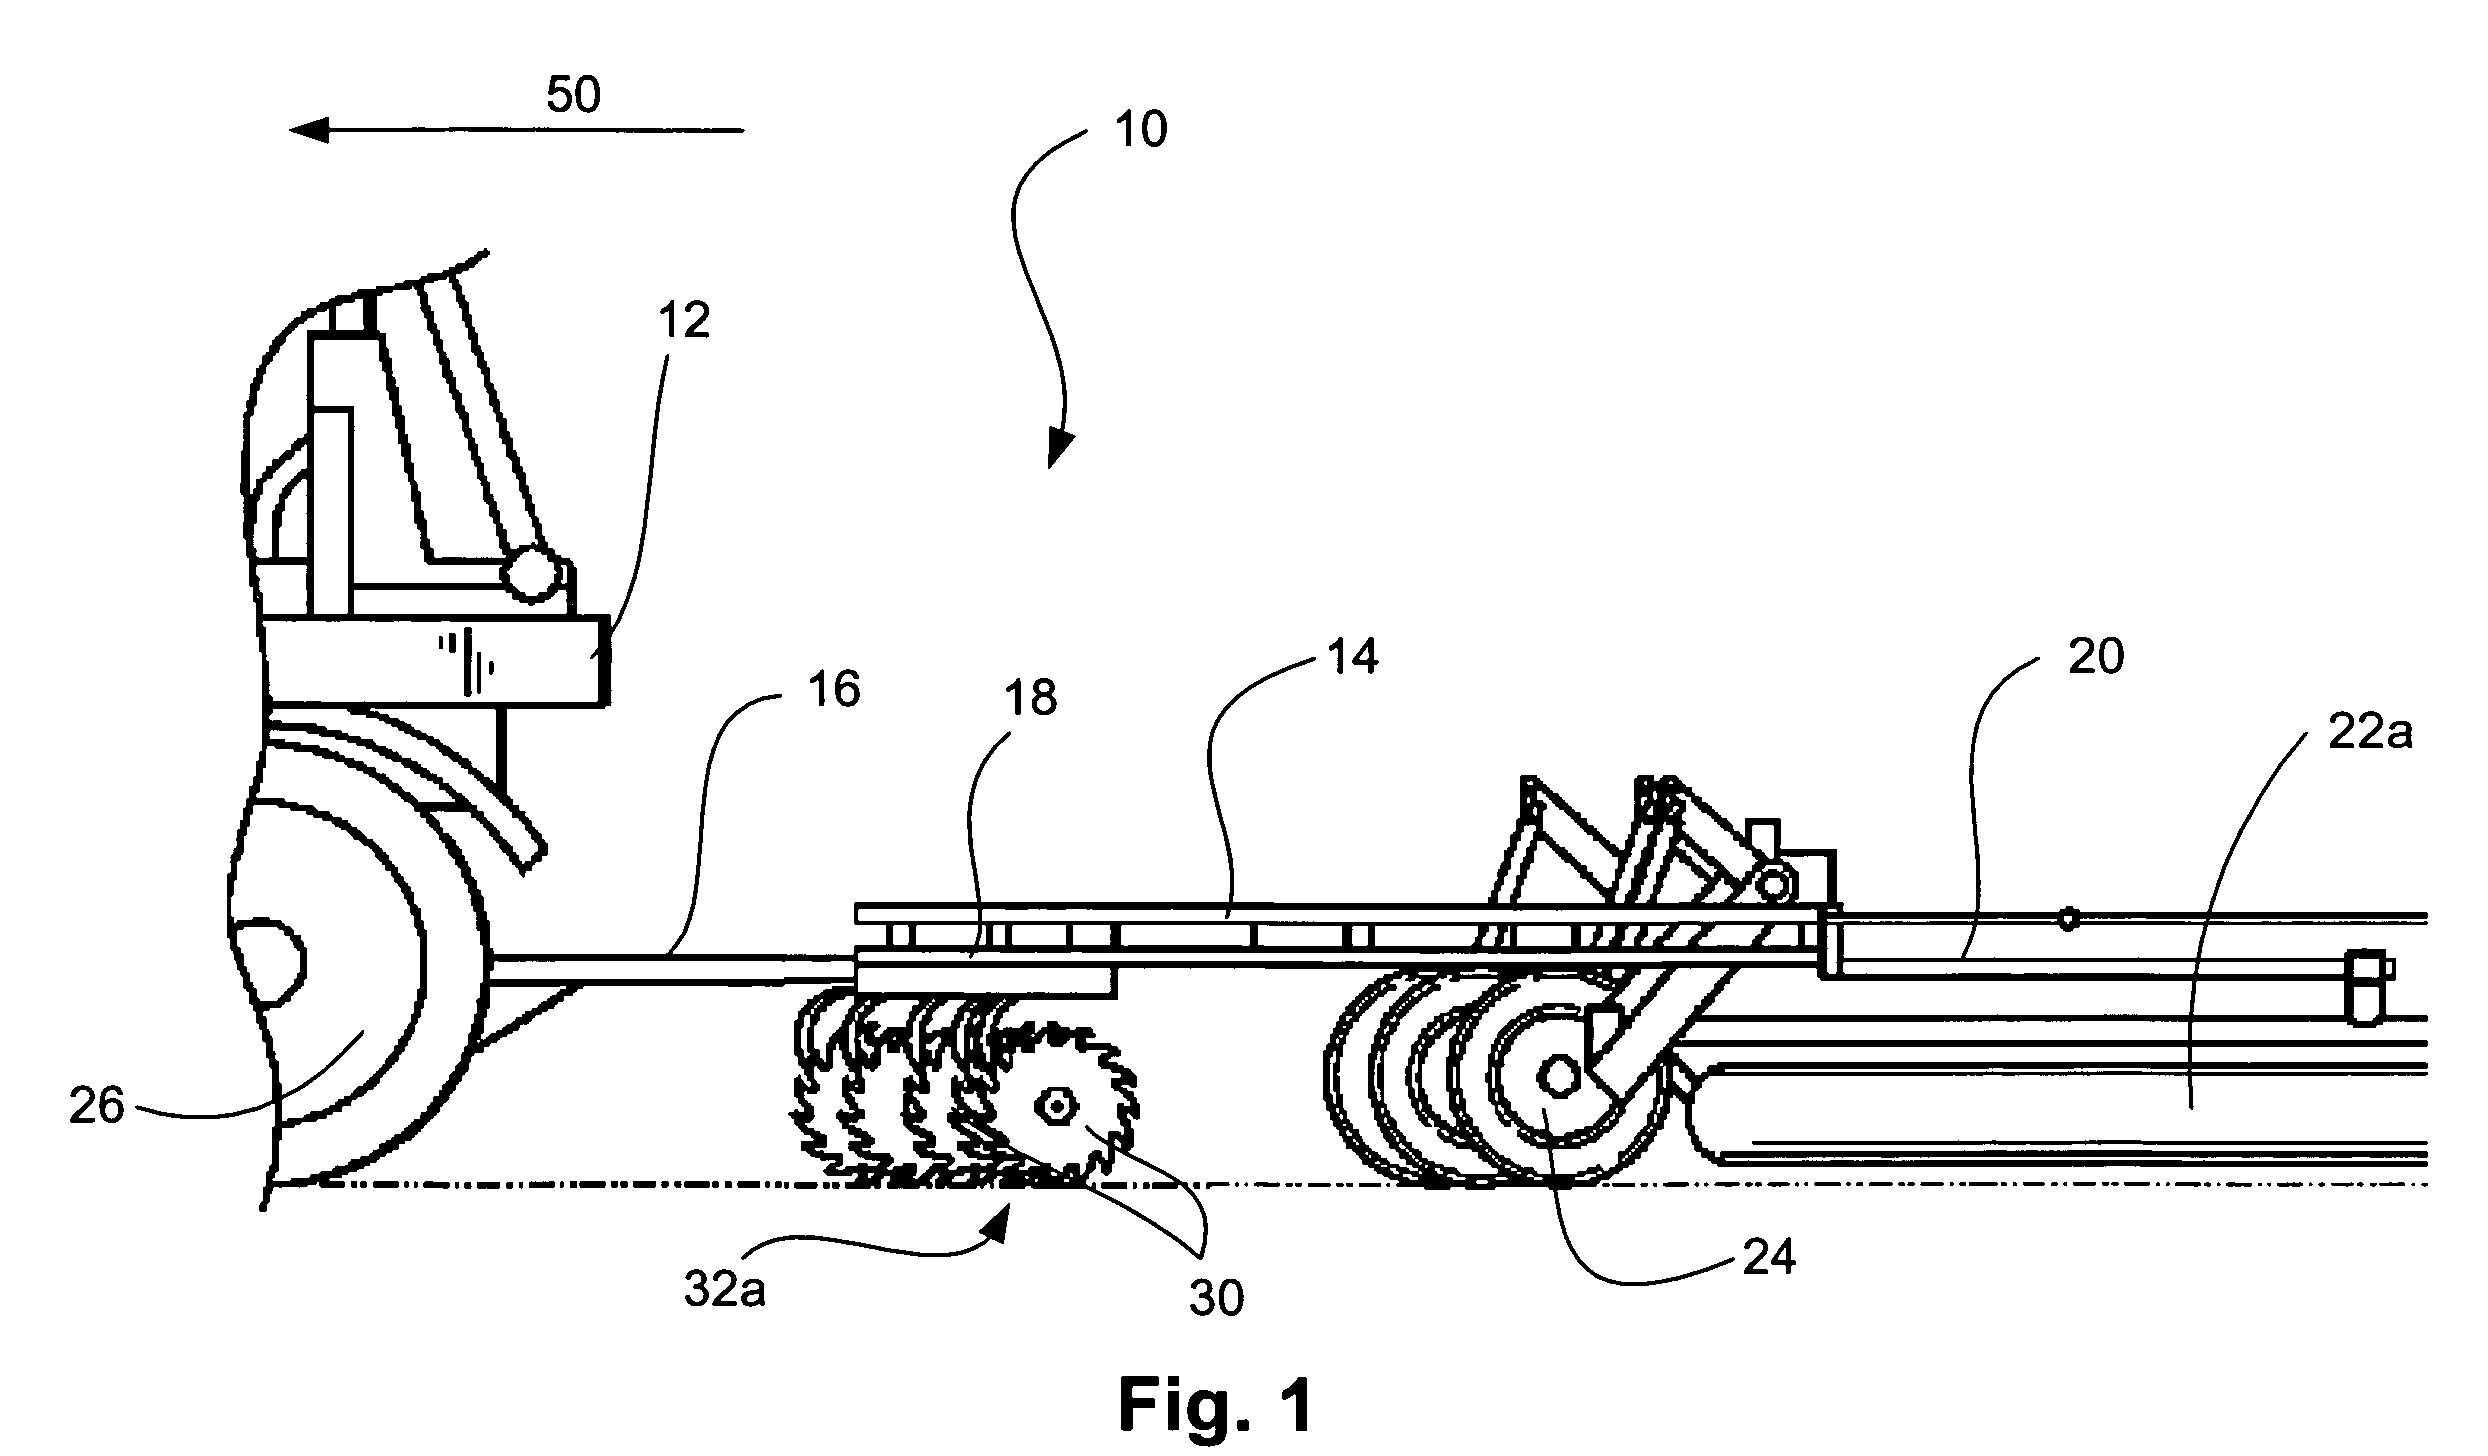 Seedbed conditioning vertical tillage apparatus